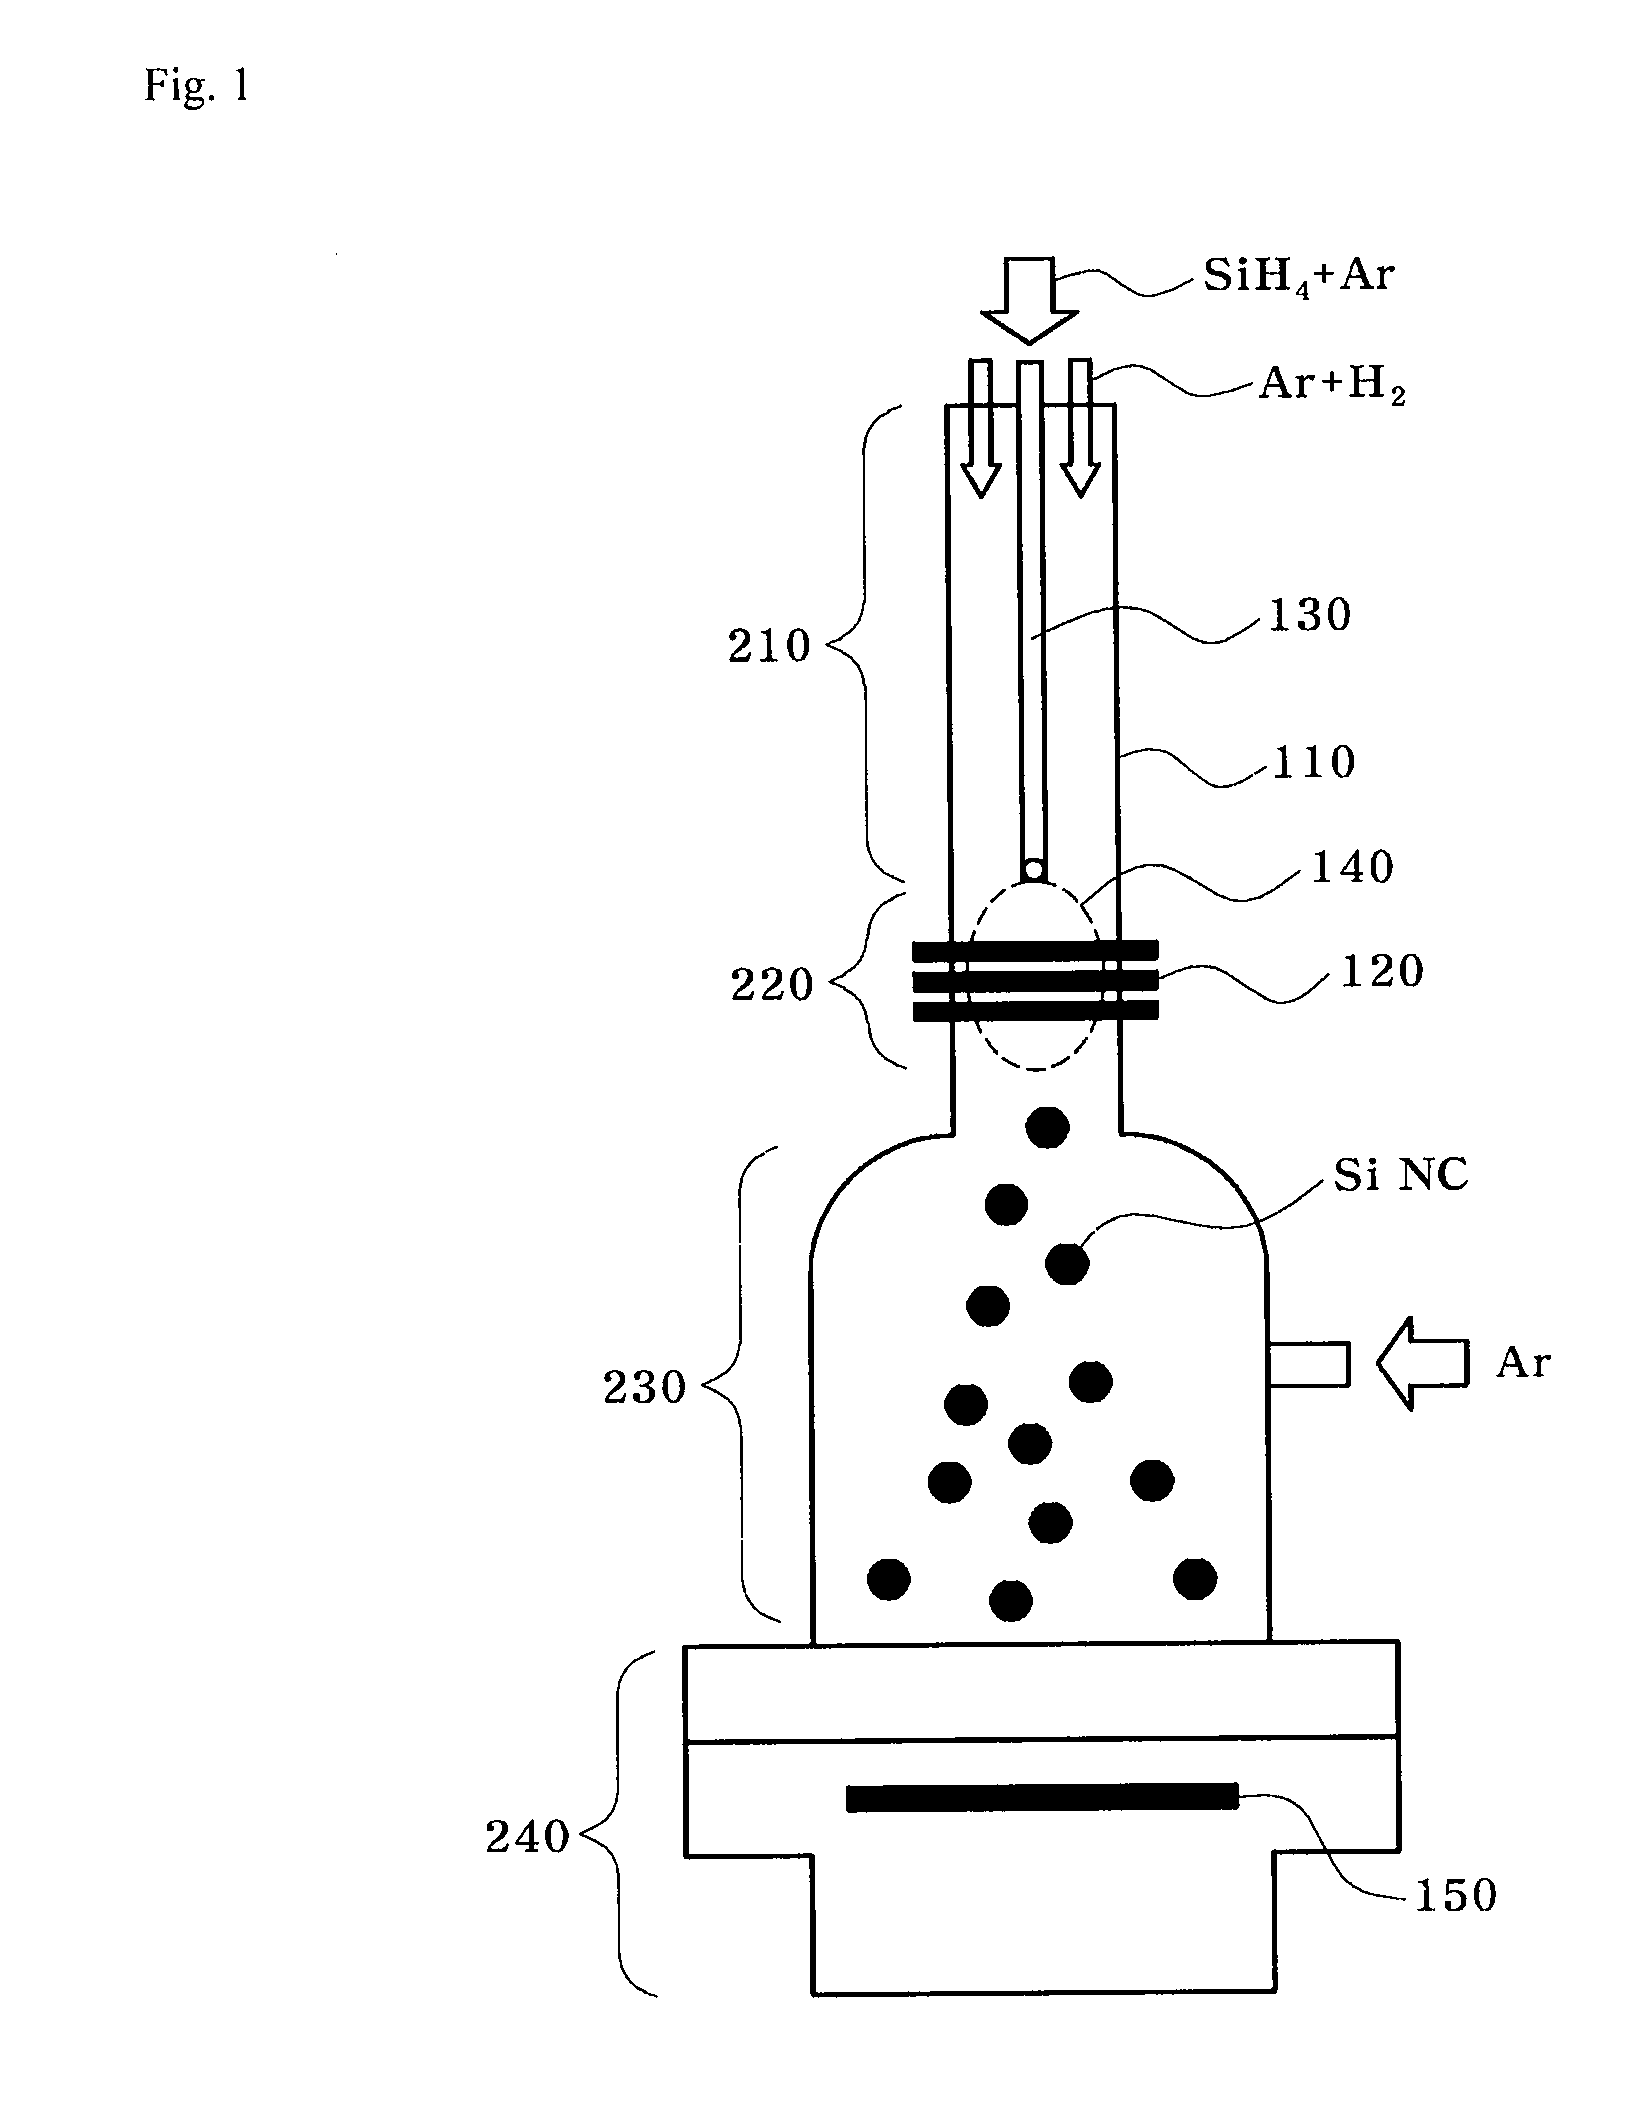 Apparatus for producing silicon nanocrystals using inductively coupled plasma